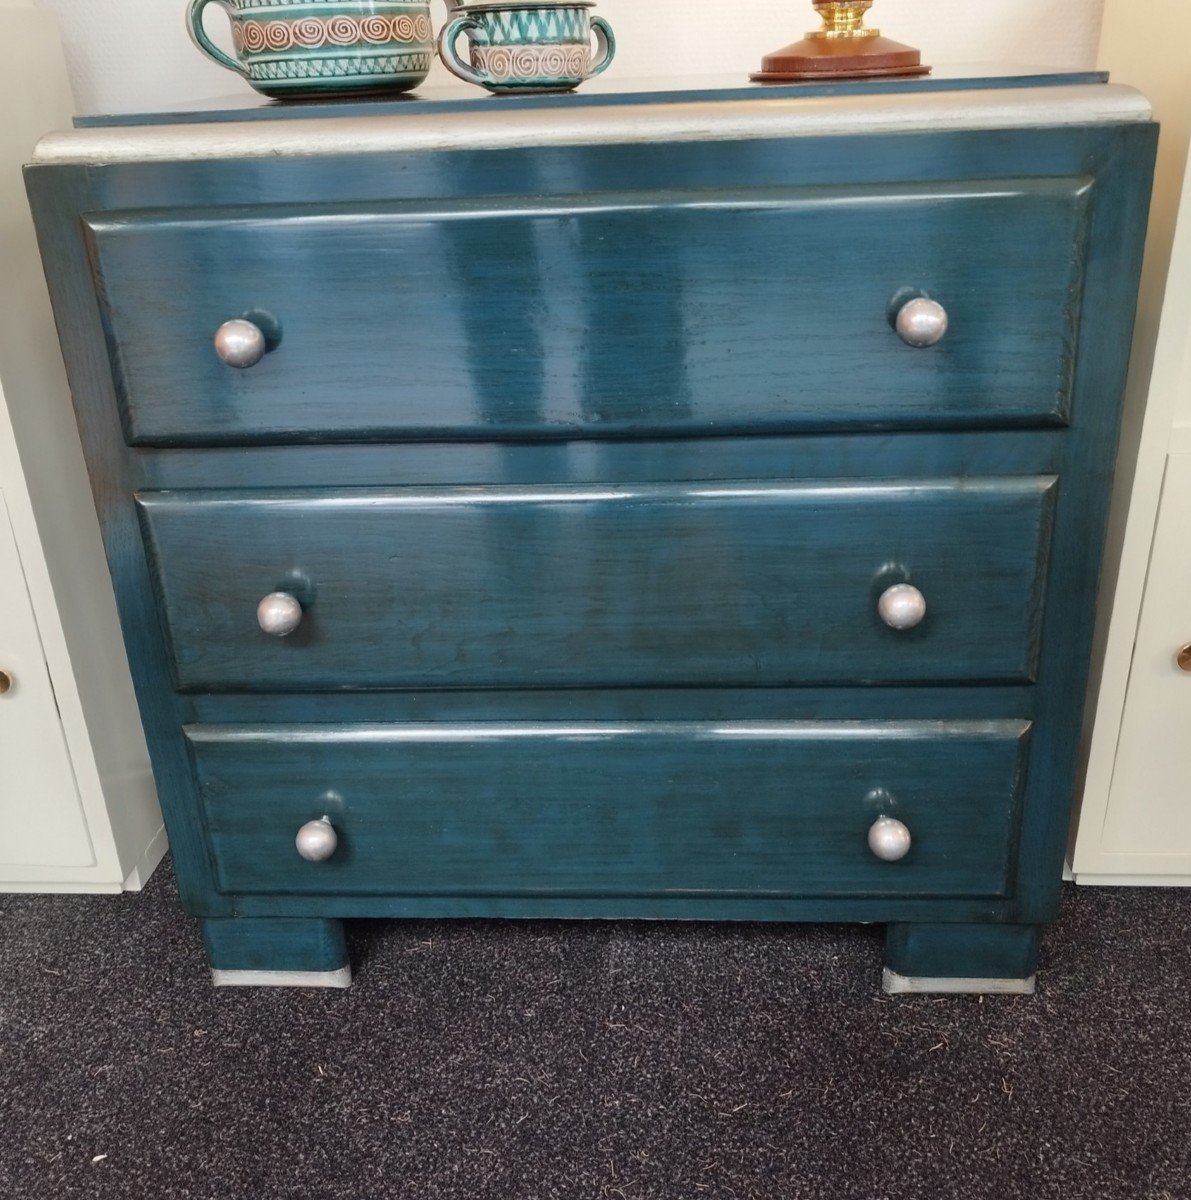 Small Oak Chest Of Drawers Lacquered Petrol Blue With Art Deco Inspiration